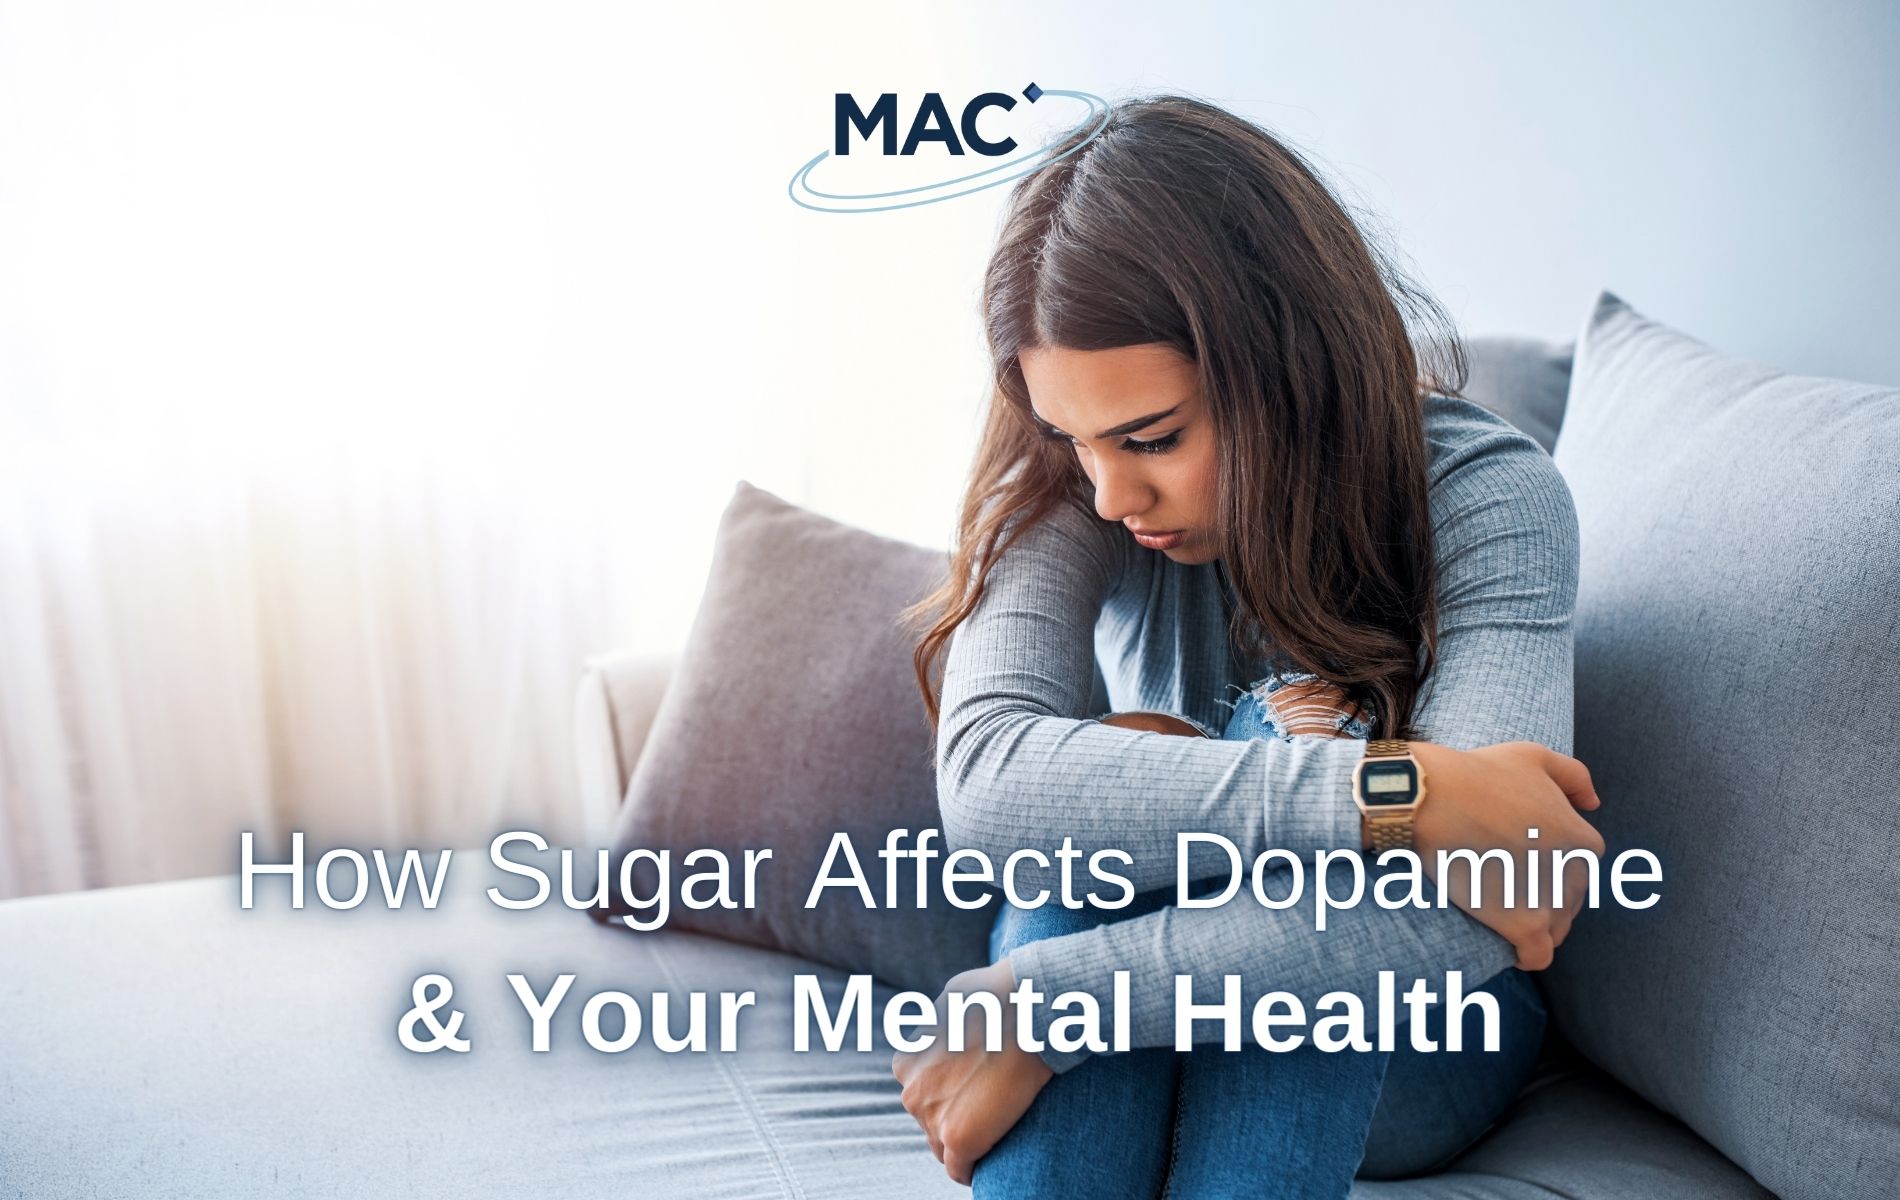 How Sugar Affects Dopamine & Your Mental Health